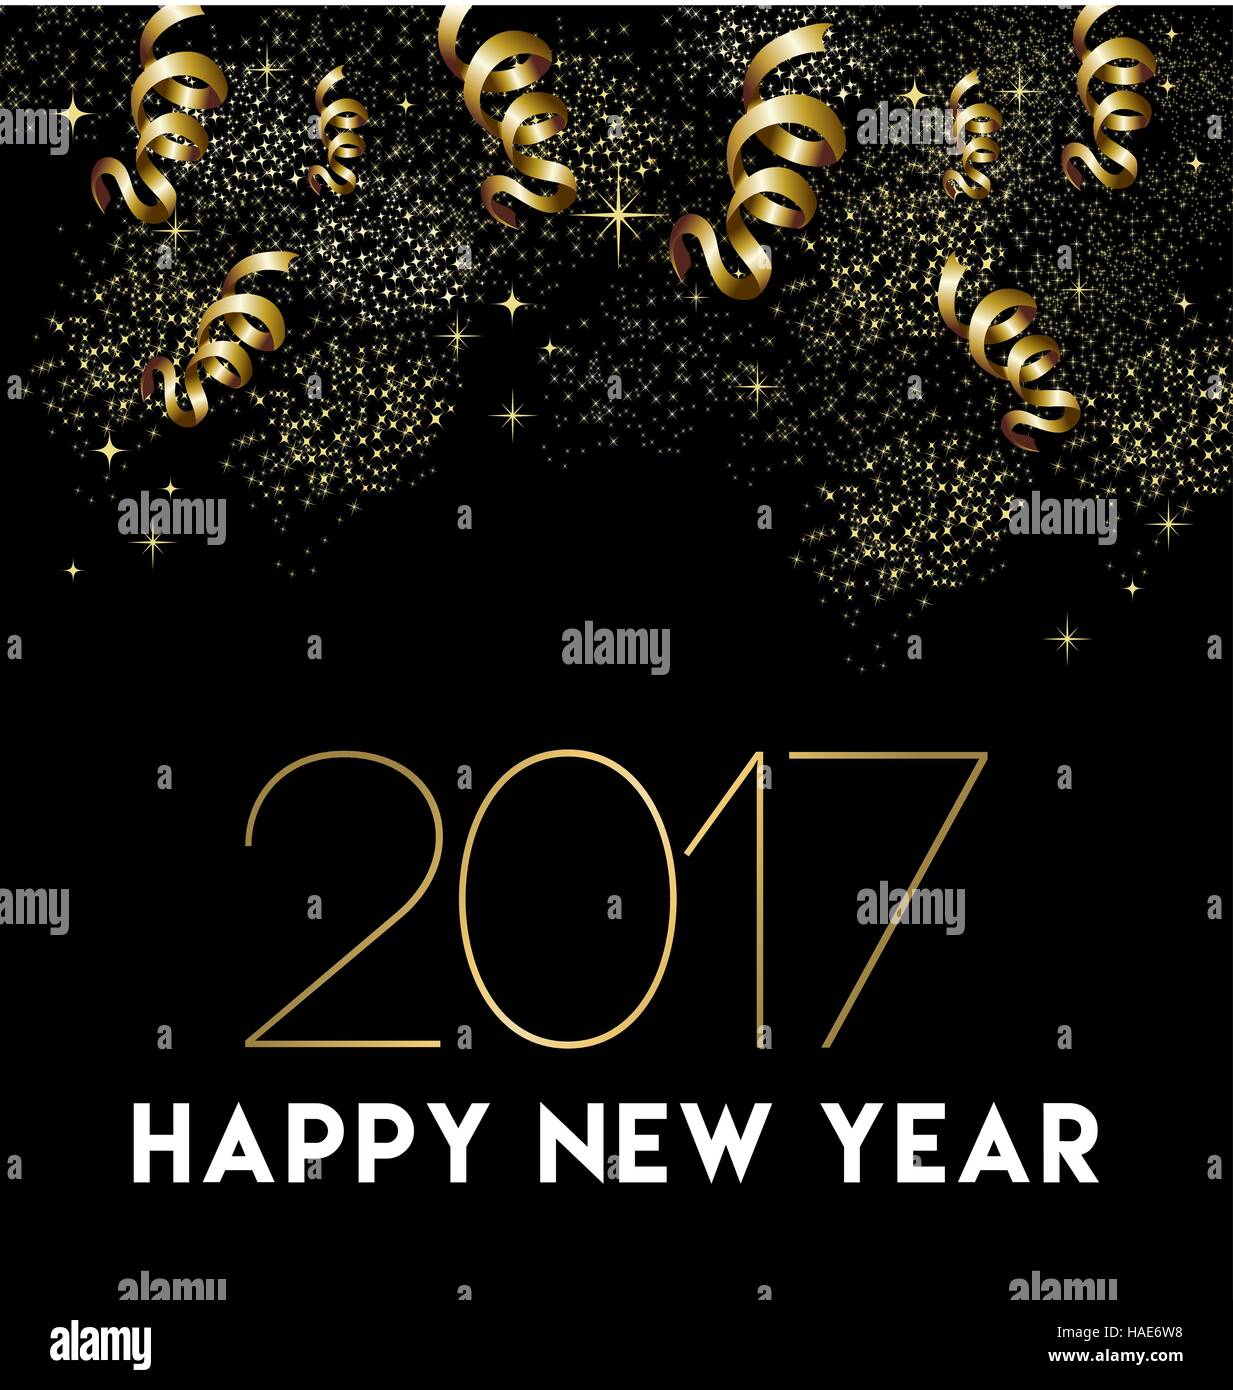 Happy New Year 2017 greeting card design with gold confetti and party celebration decoration. EPS10 vector. Stock Vector